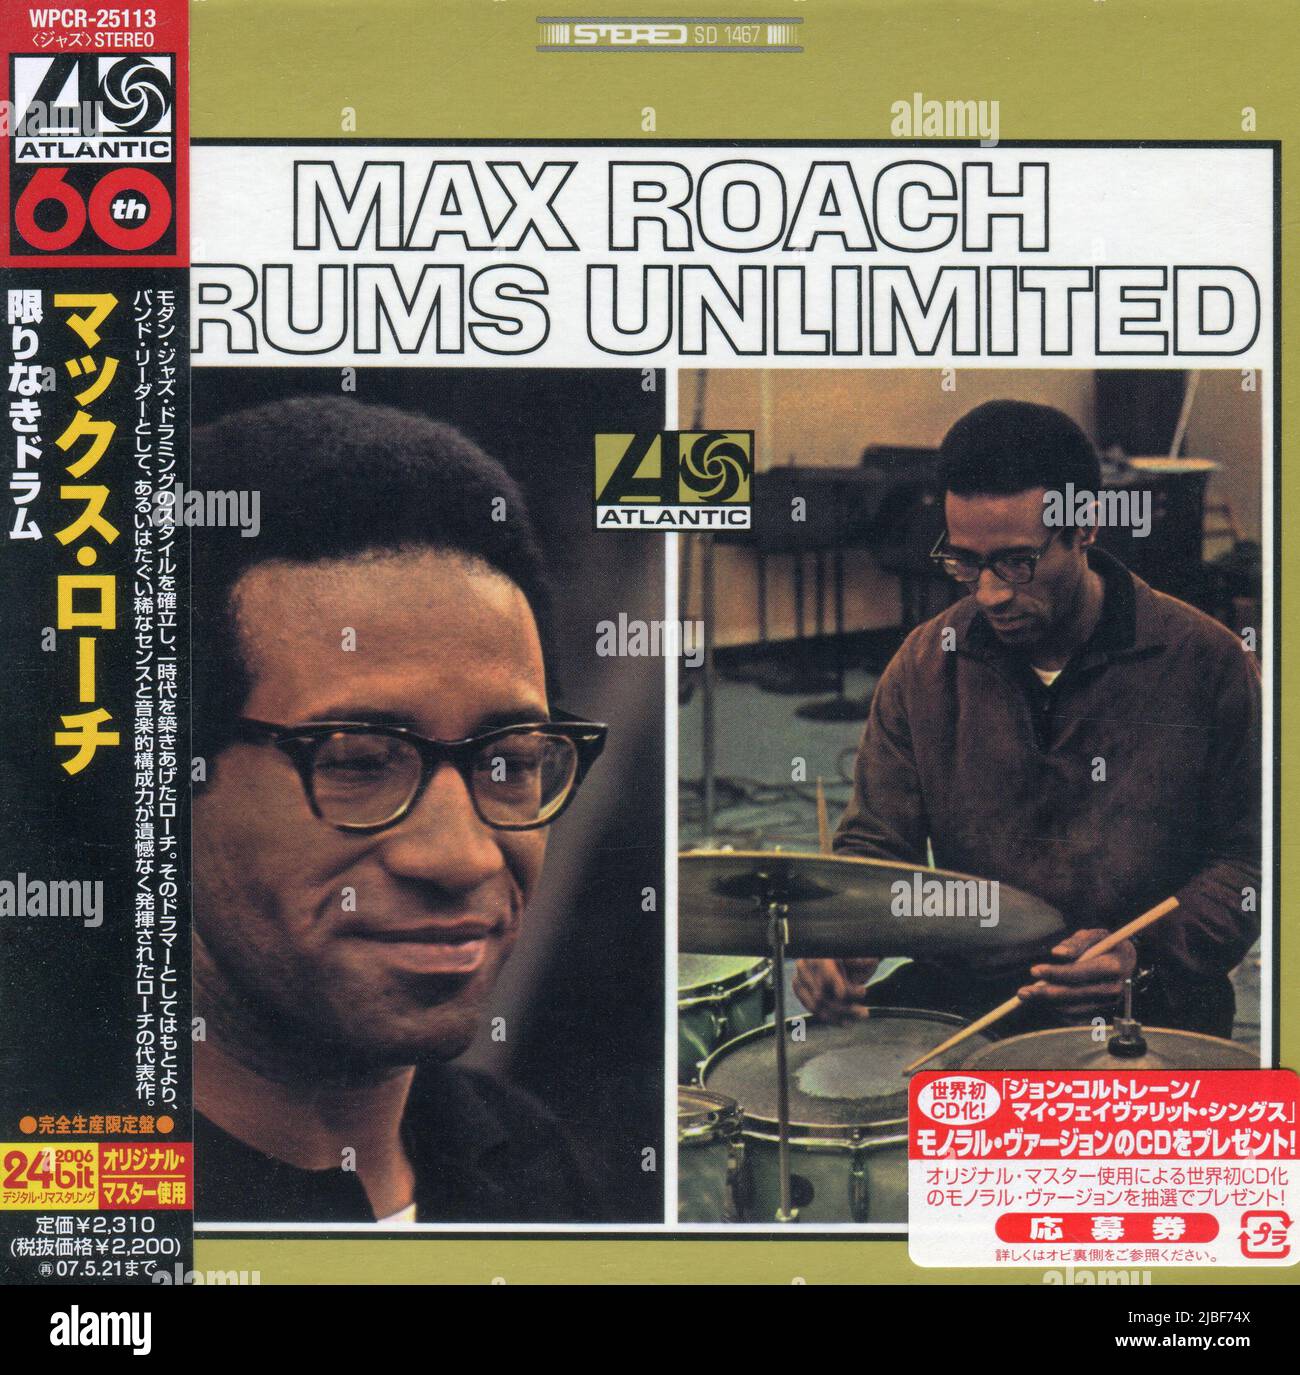 CD: Max Roach  DRUMS UNLIMITED (WPCR-25113), Released: 22 november 2006. Stock Photo